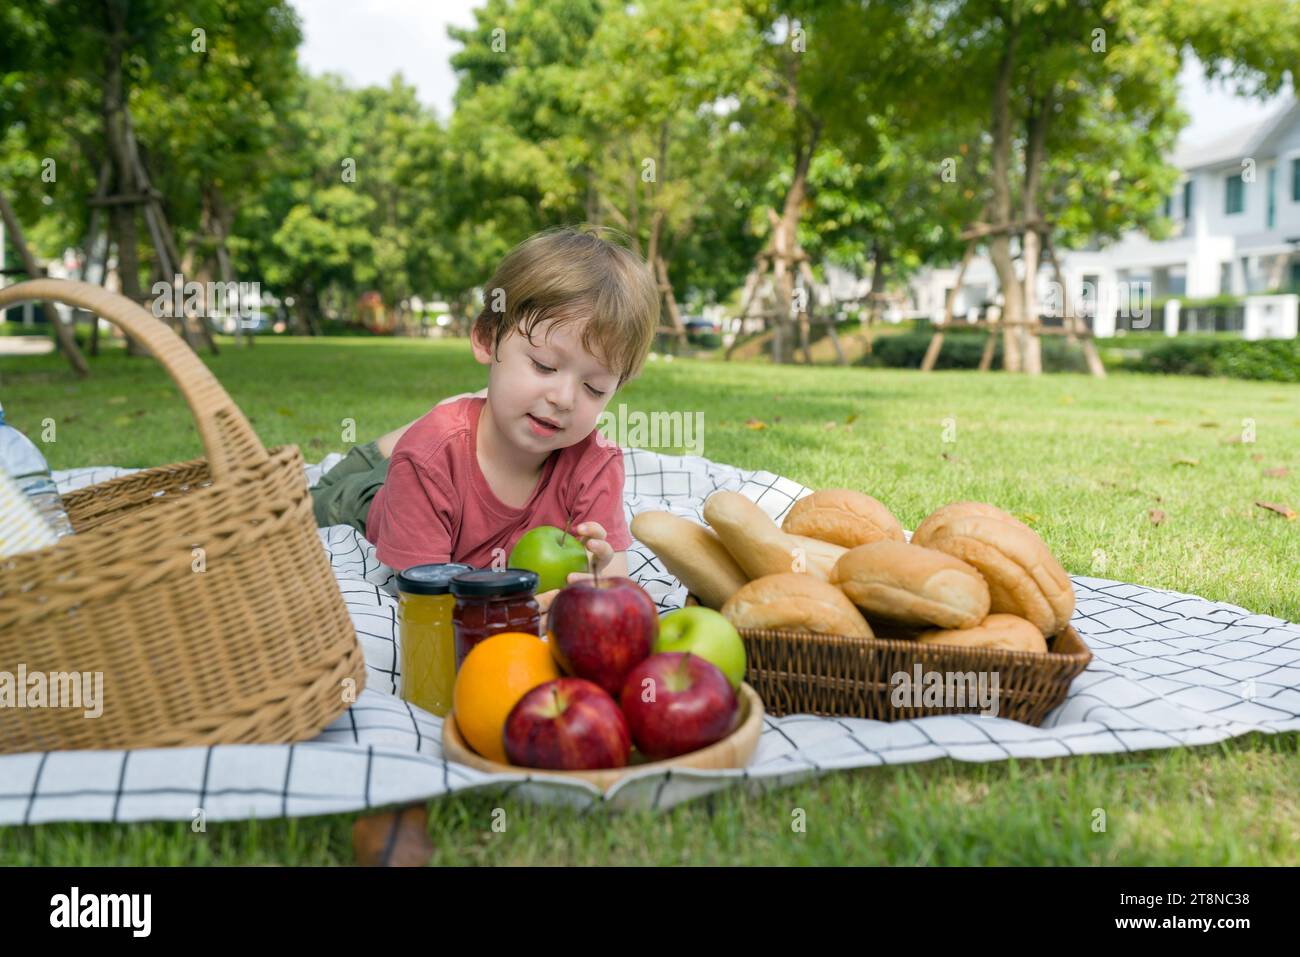 Young boy sit on a picnic blanket  with a basket, colorful fruit and freshly-baked bread. Enjoying outdoor picnic in sunny park Stock Photo